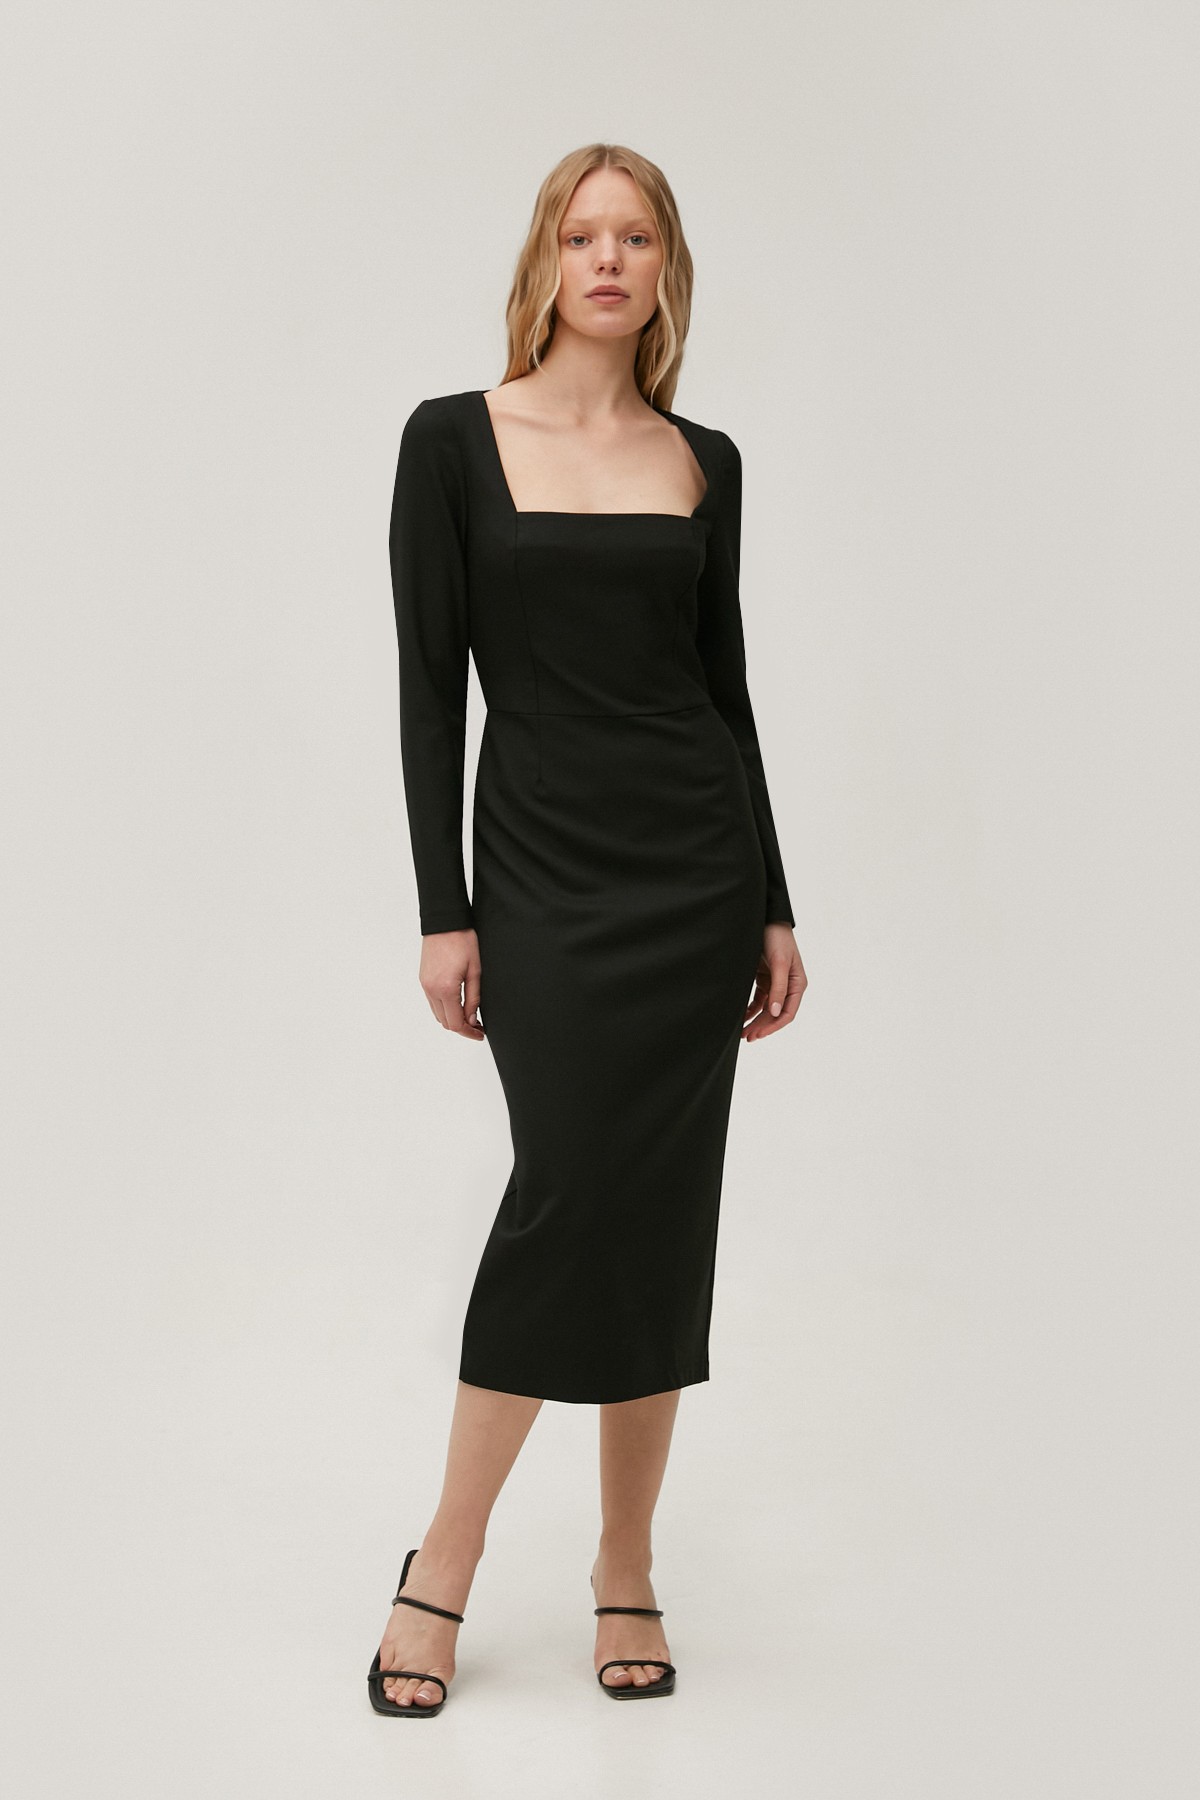 Black midi dress made of suiting fabric with wool